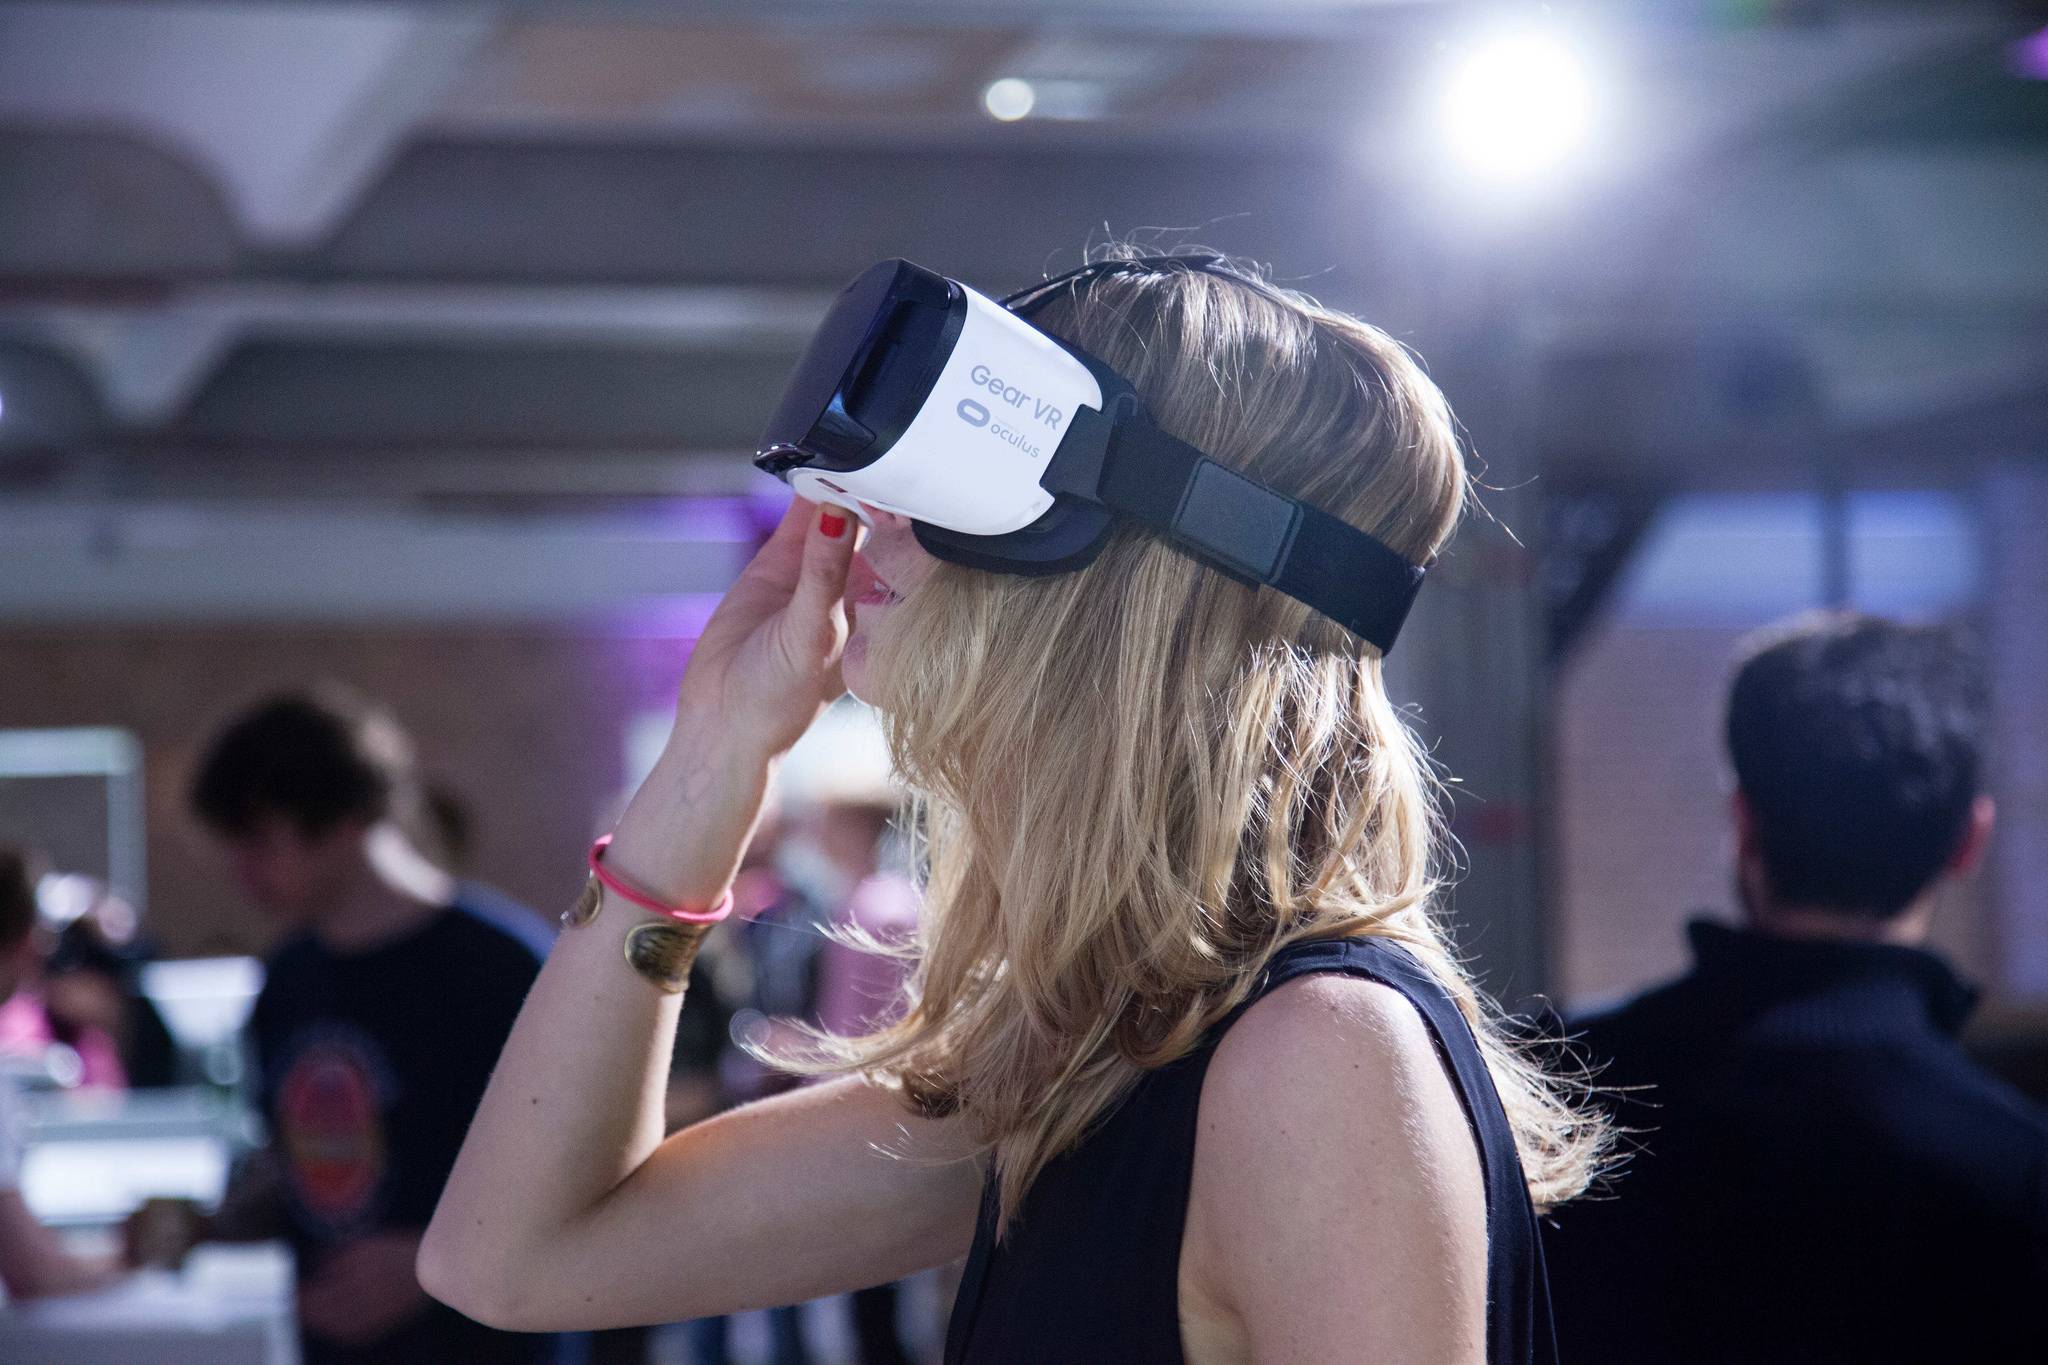 VR Pay lets shoppers pay by nodding their heads